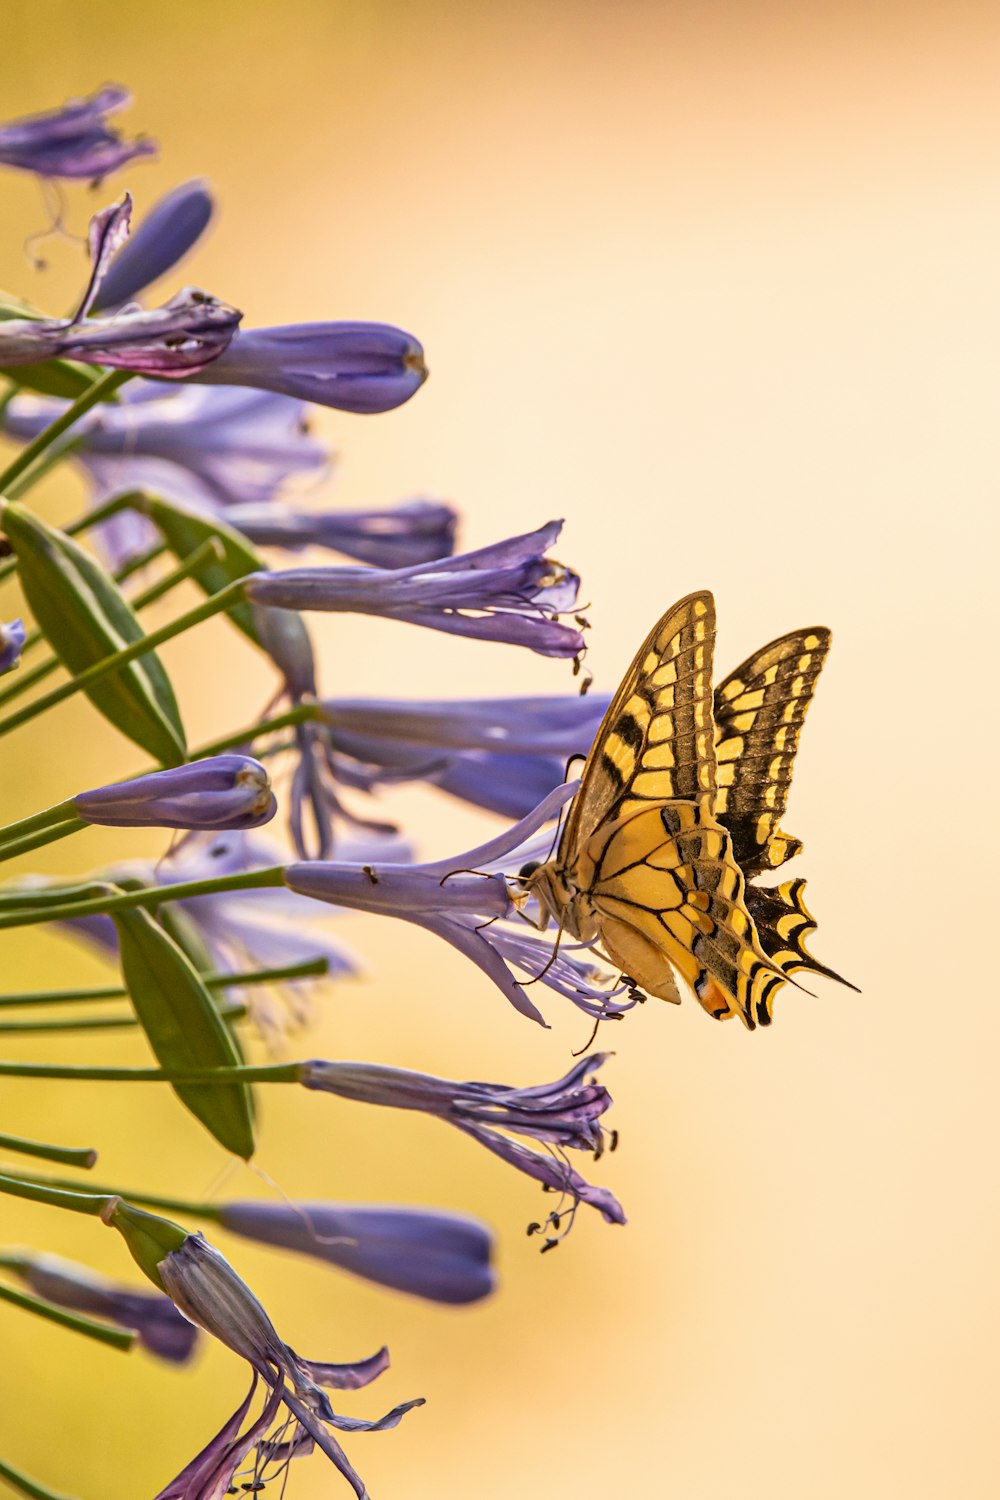 yellow and black butterfly on purple flower